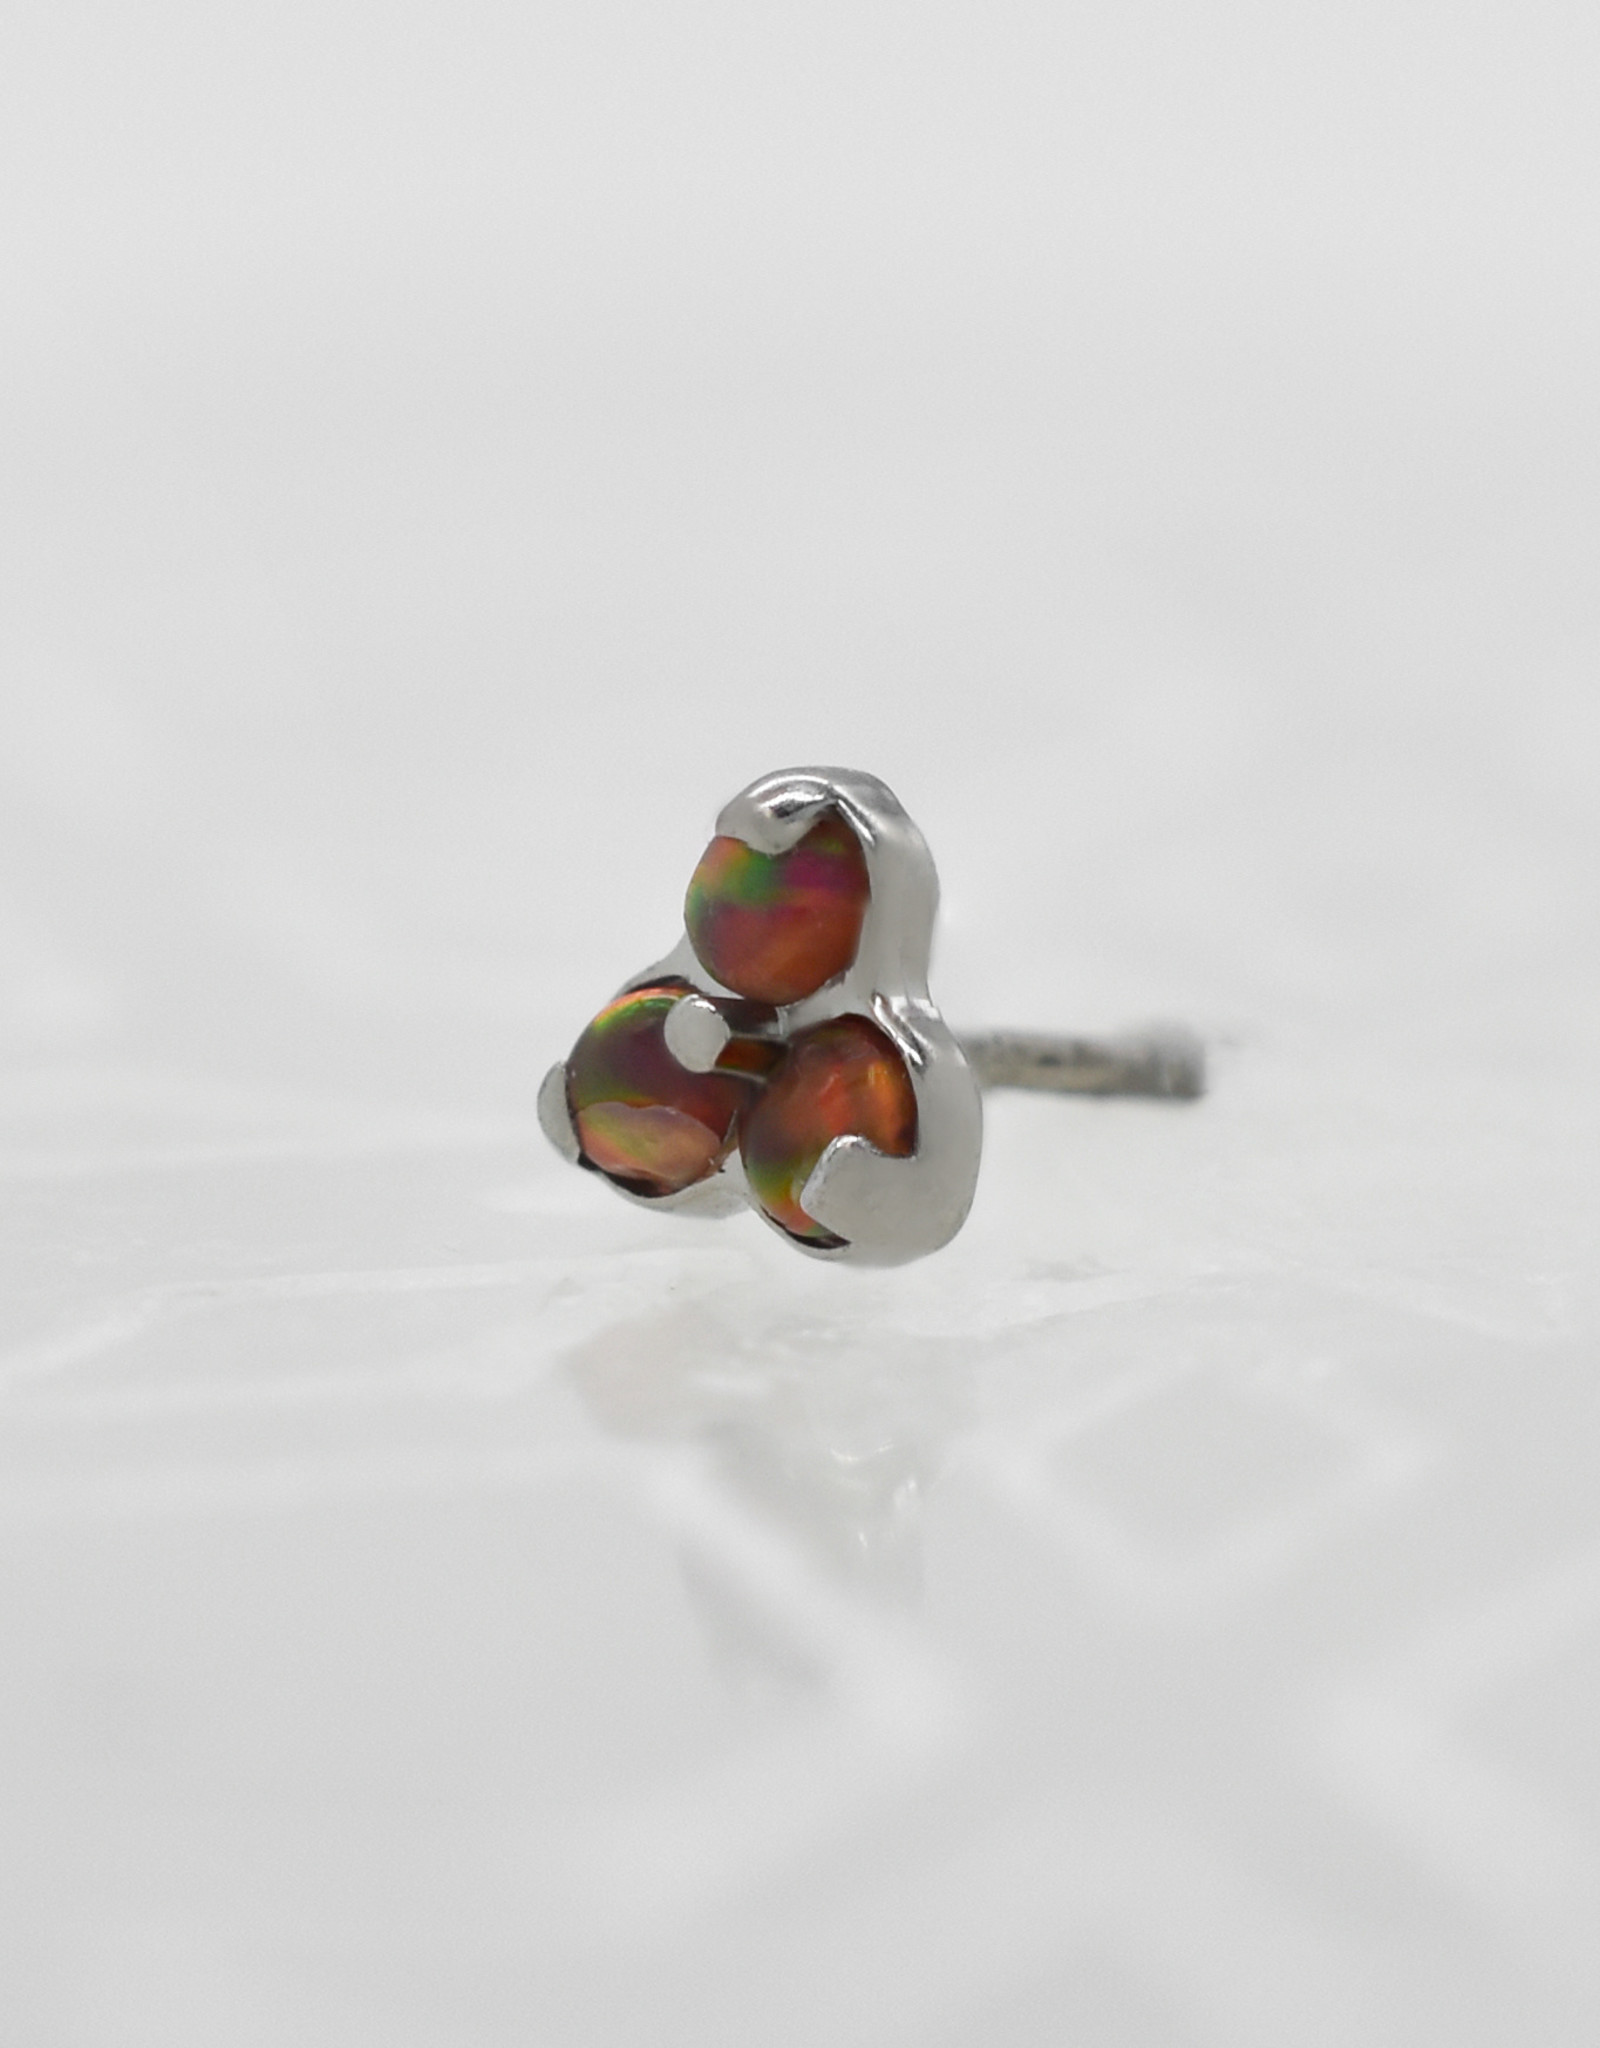 Industrial Strength Industrial Strength 1.5mm Tri Gem with Fire Red Opal Ti